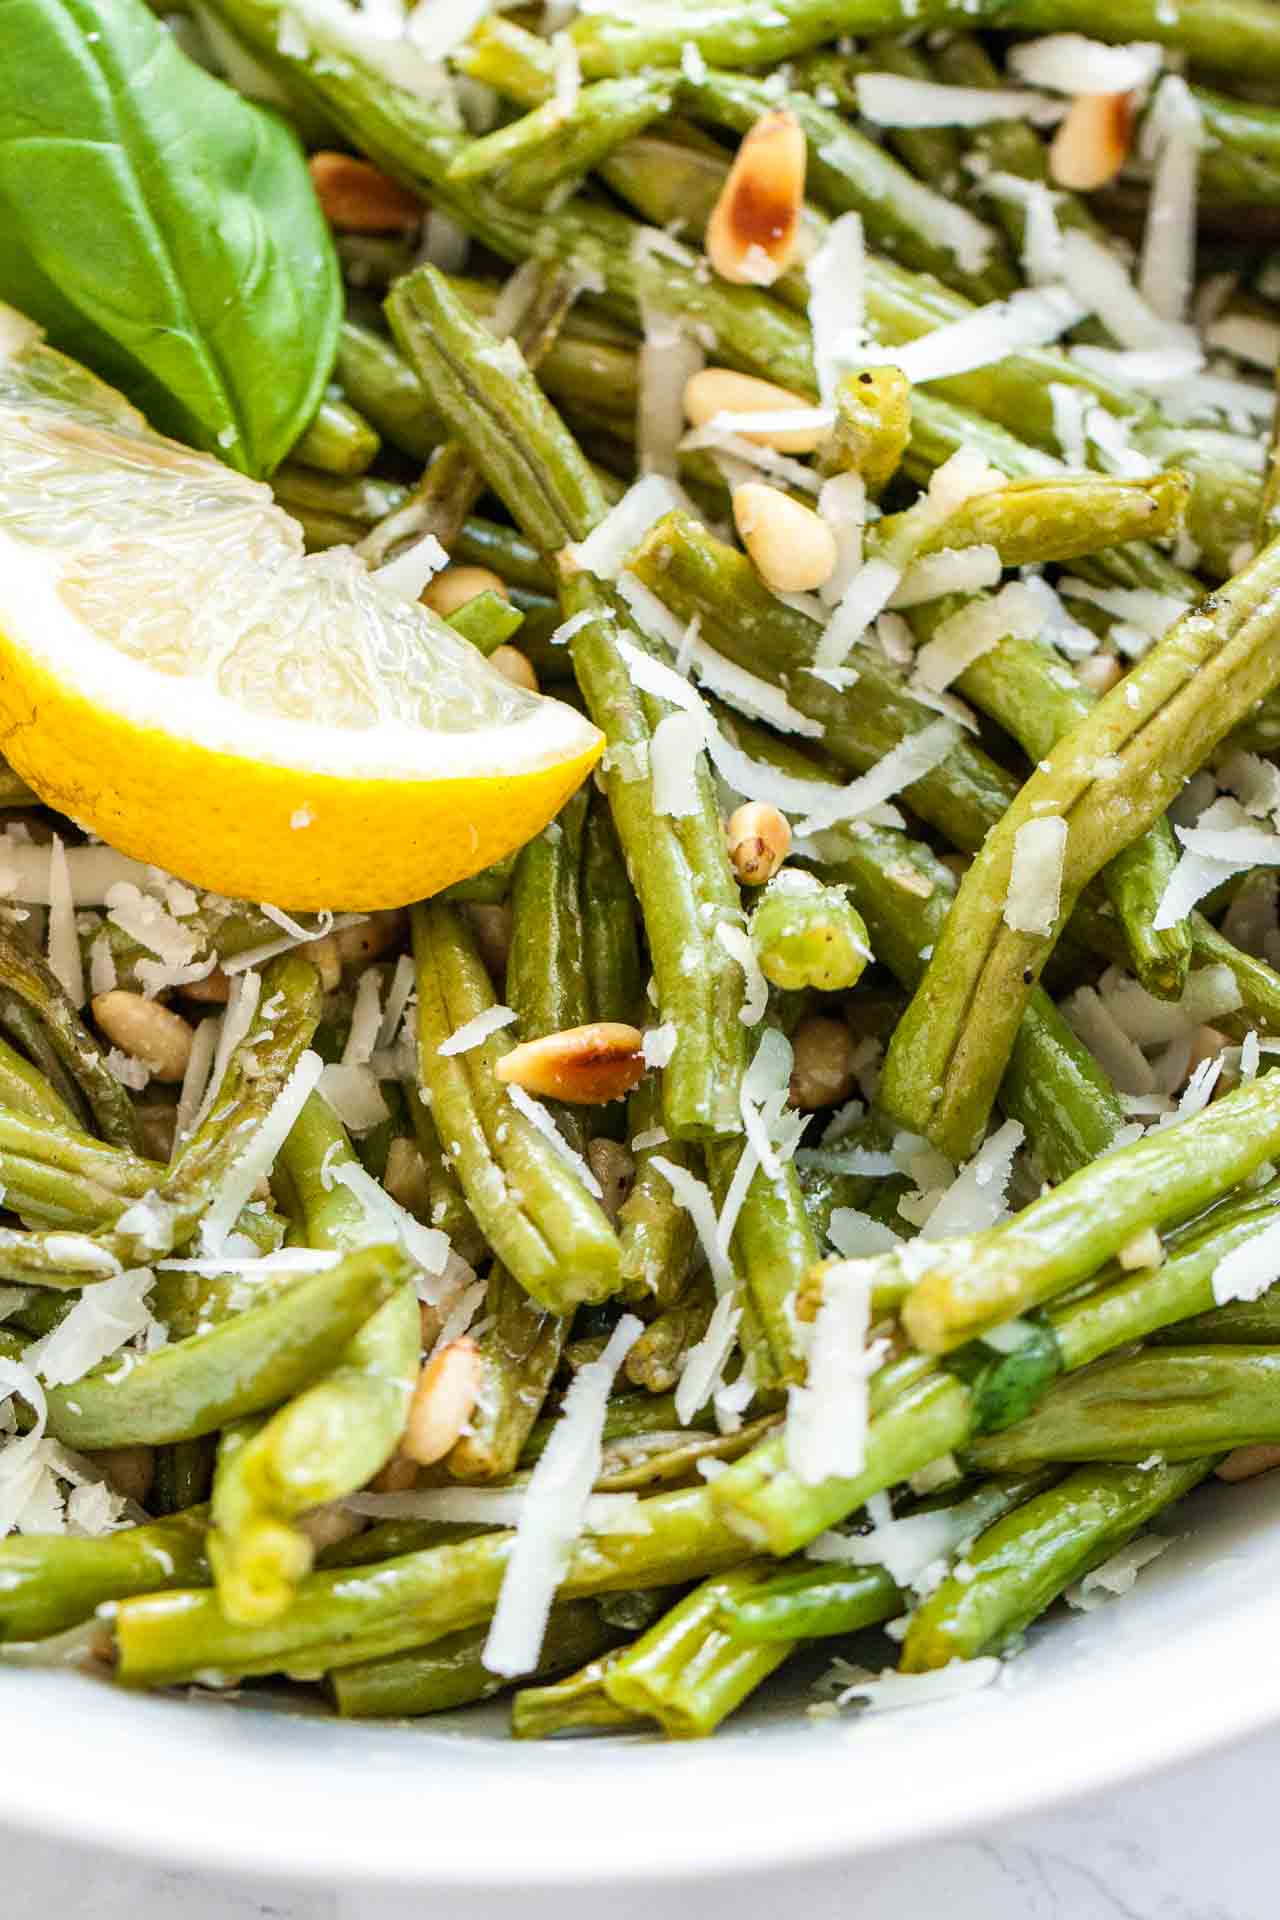 Parmesan Oven Roasted Green Beans from https://platedcravings.com/